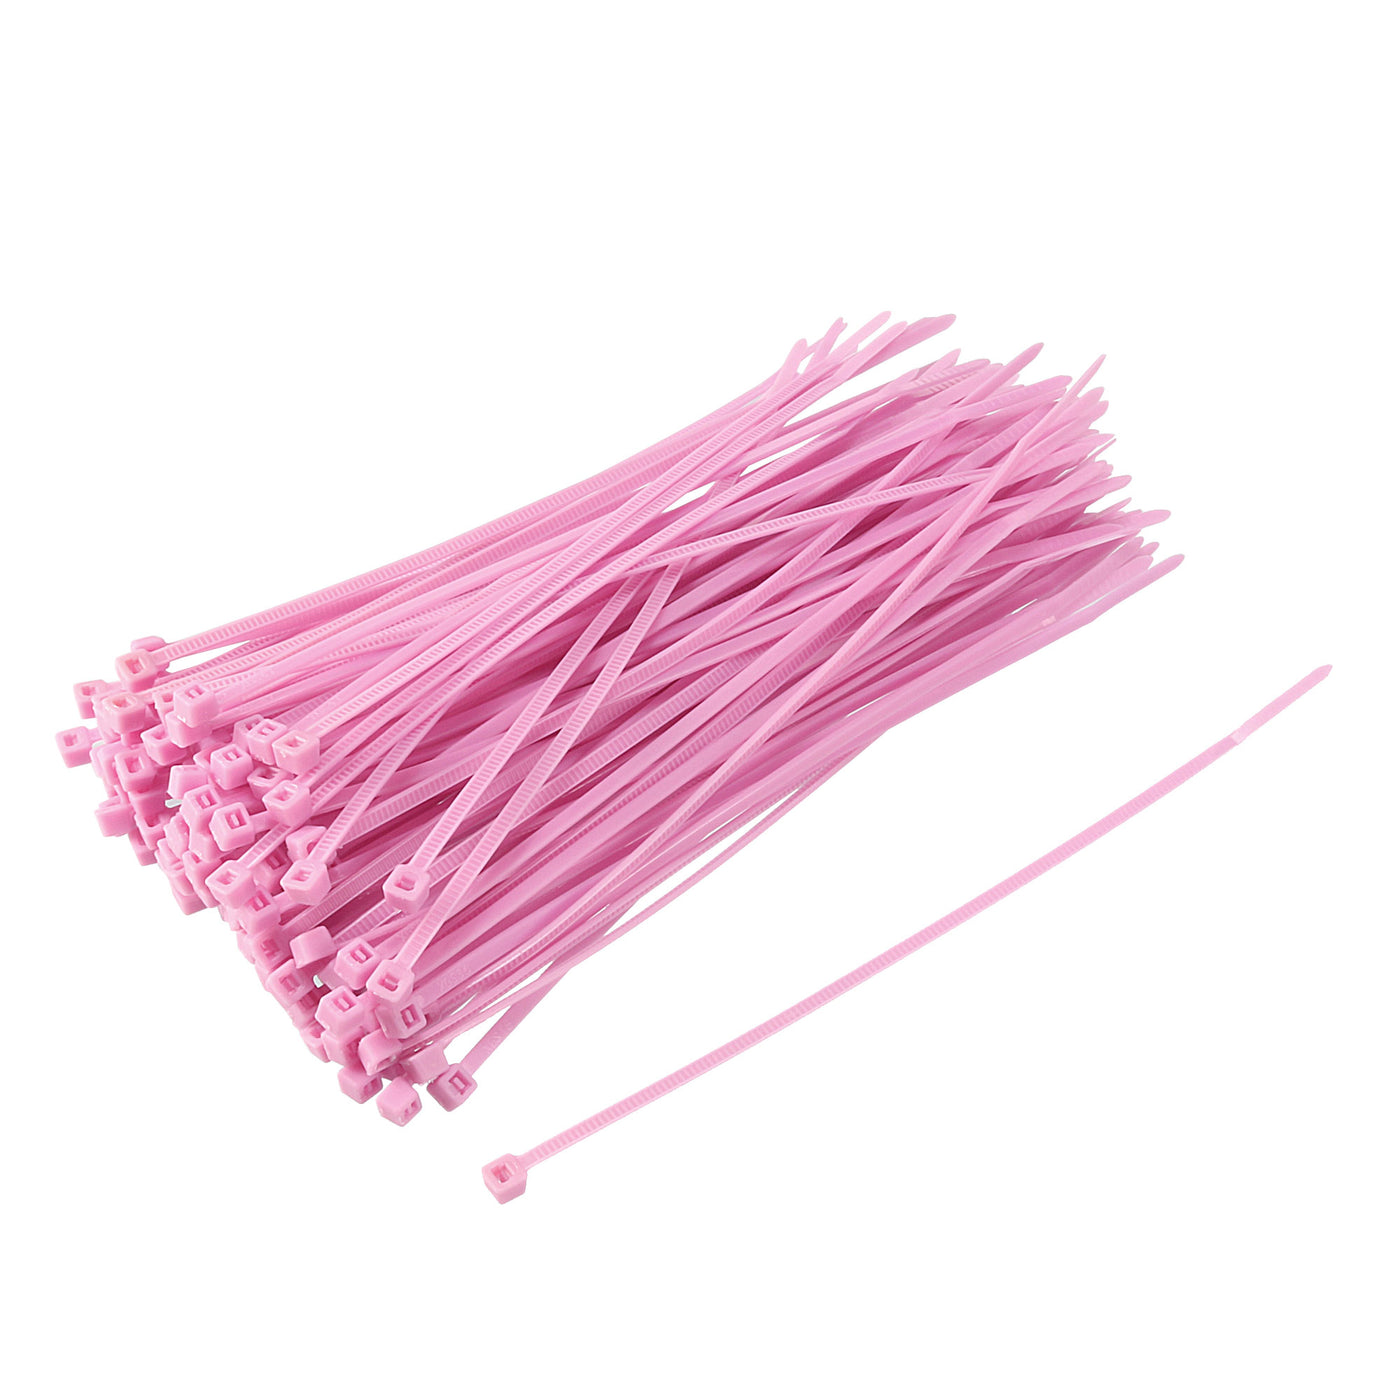 uxcell Uxcell Cable Zip Ties 150mmx2.5mm Self-Locking Nylon Tie Wraps Pink 120pcs